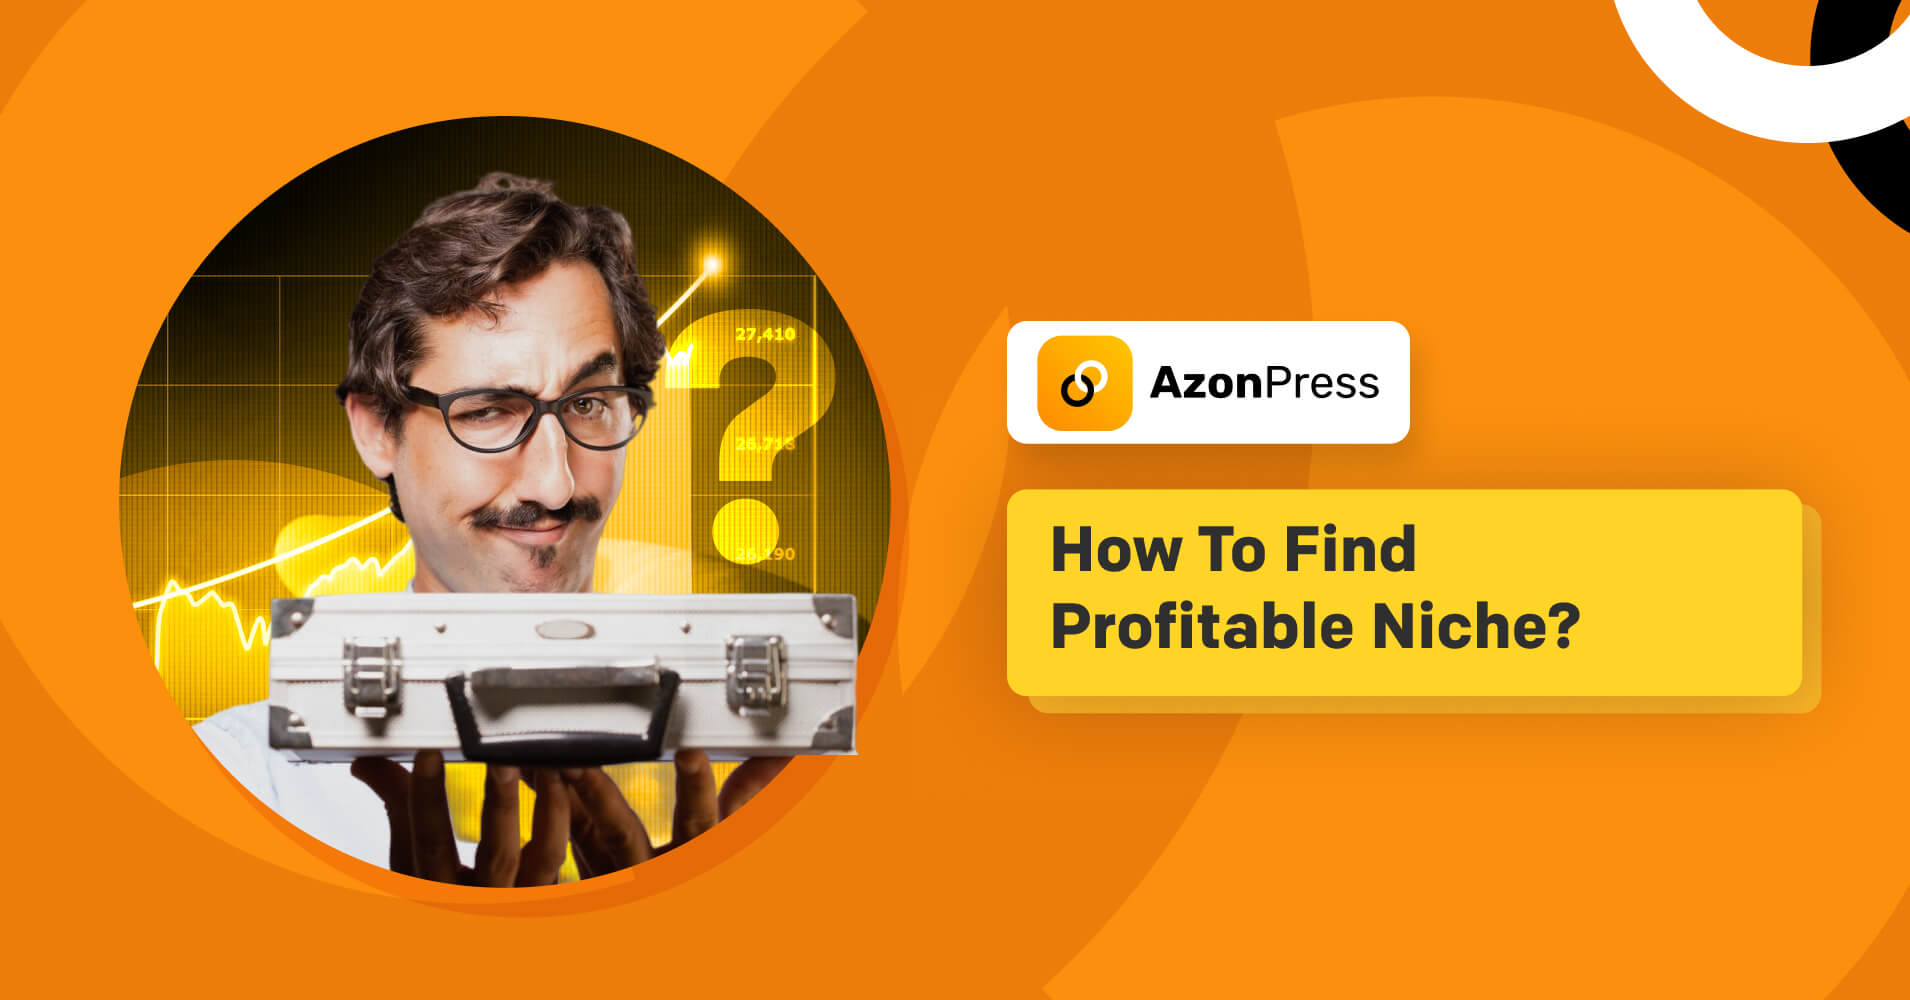 How To Find Profitable Niche